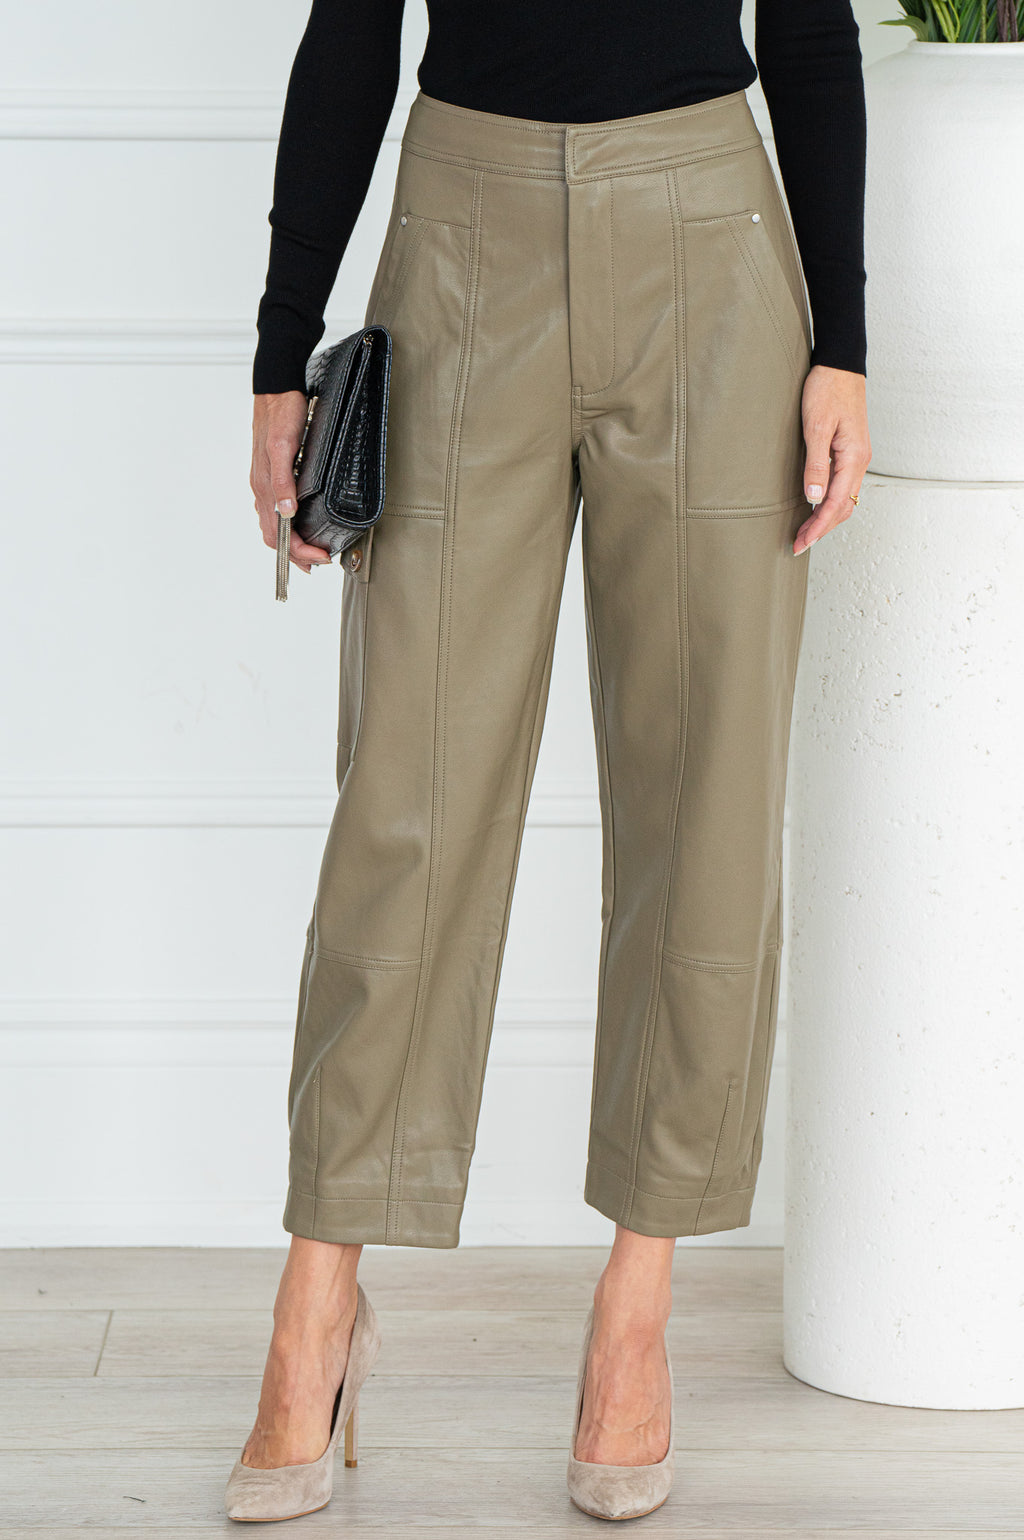 TURIN FAUX LEATHER PANTS – Sense of Independence Boutique